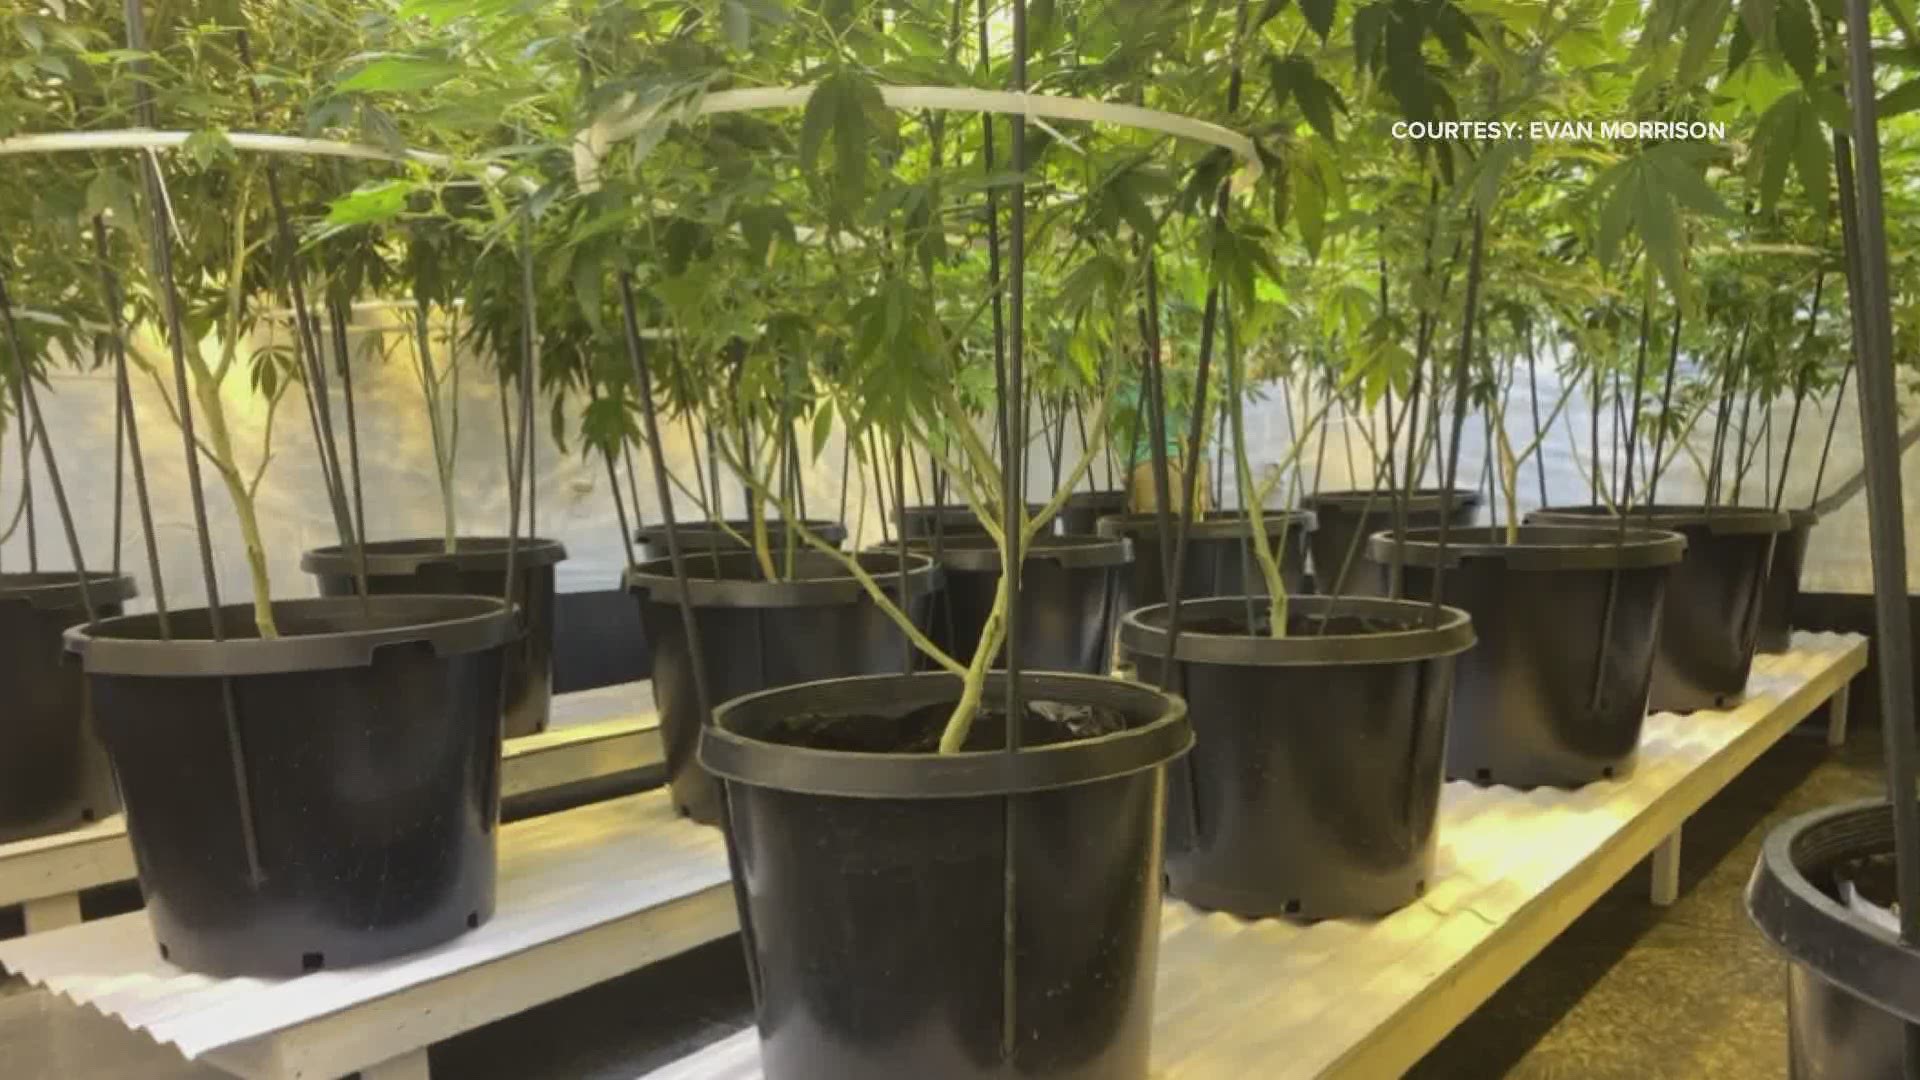 First pot licenses could be awarded this month